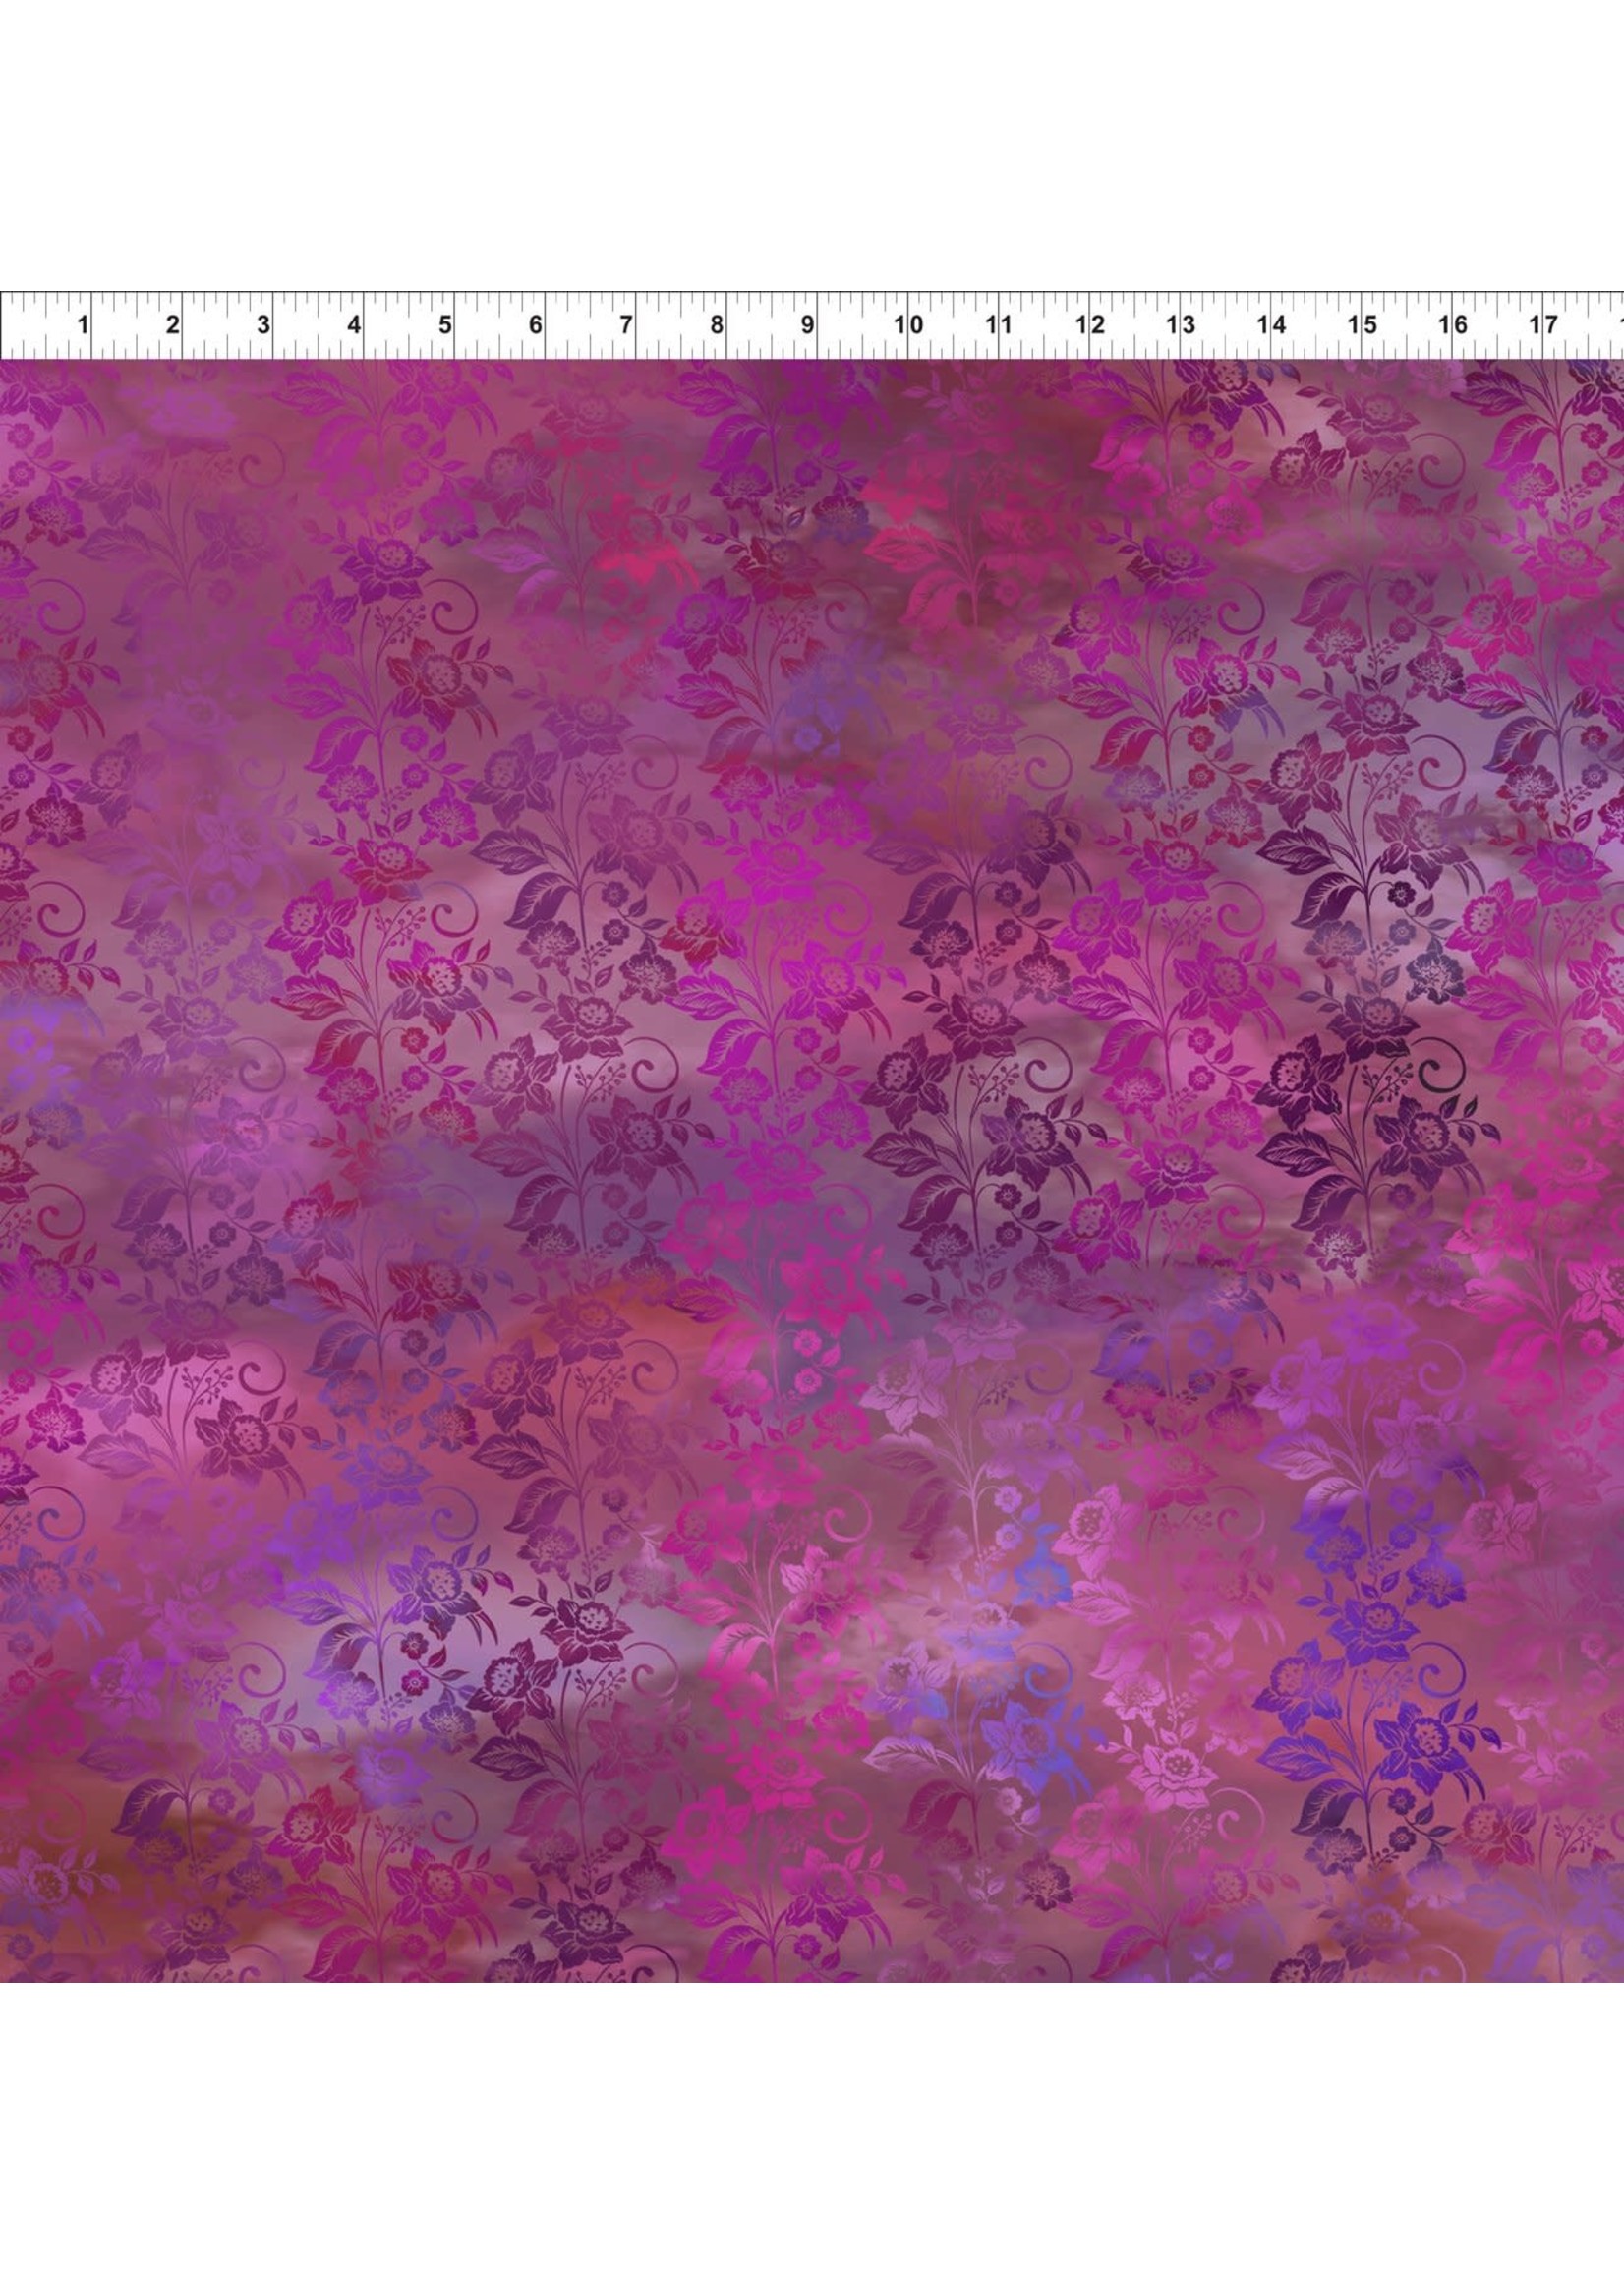 In The Beginning The Diaphanous Collection - Mystical - 5ENC4 - Multi Pink